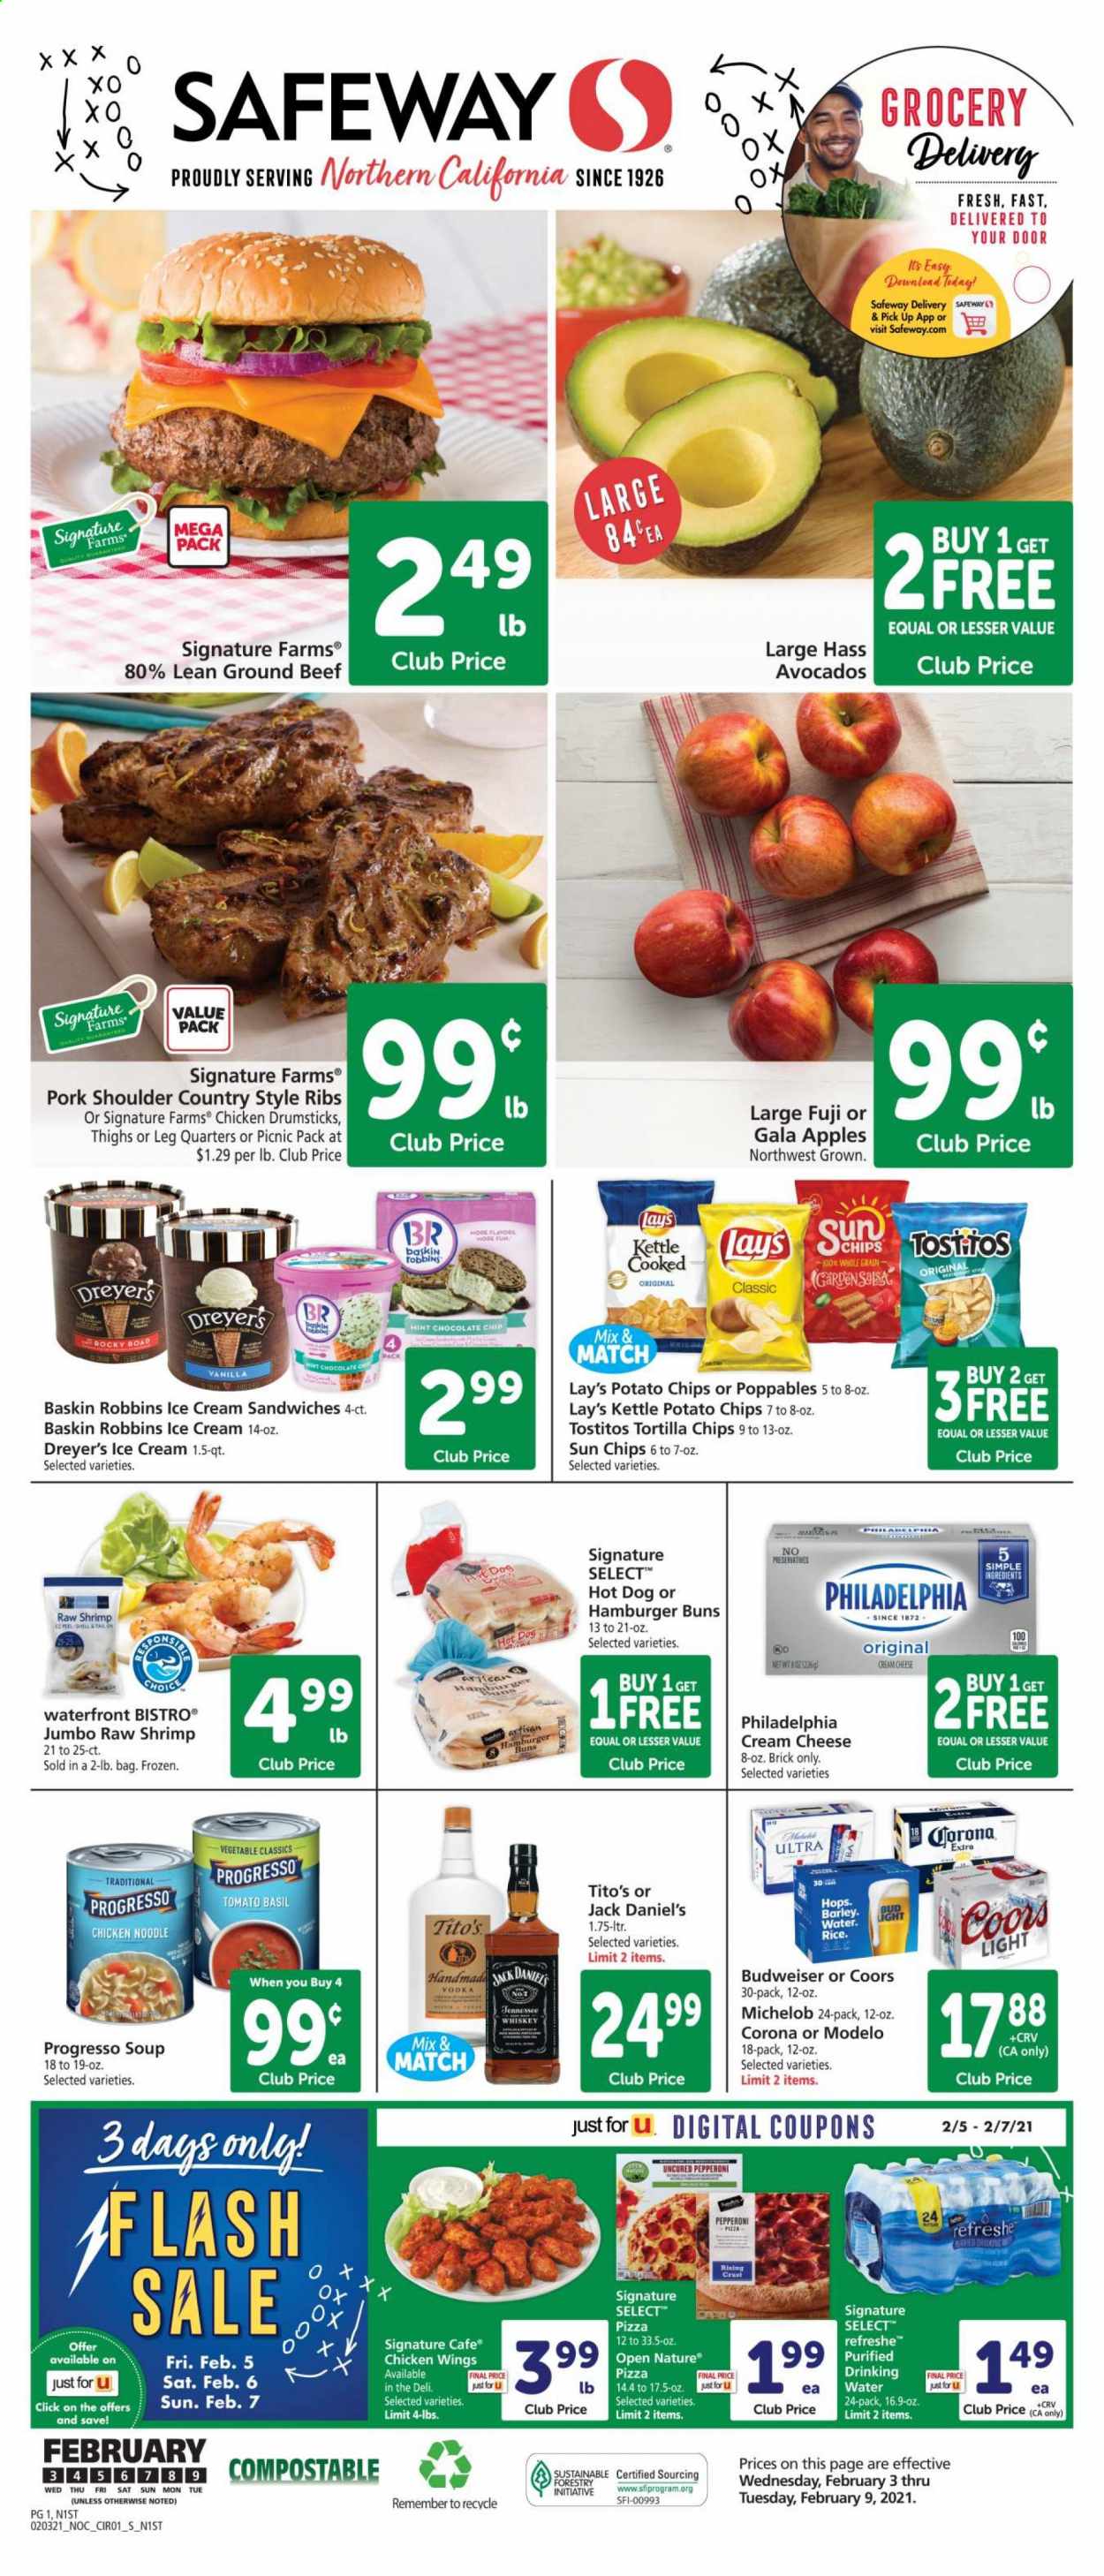 thumbnail - Safeway Flyer - 02/03/2021 - 02/09/2021 - Sales products - burger buns, buns, apples, chicken wings, chicken drumsticks, beef meat, ground beef, pork meat, pork shoulder, country style ribs, shrimps, cream cheese, hot dog, Jack Daniel's, pizza, Progresso, pepperoni, Philadelphia, cheese, ice cream, ice cream sandwich, tortilla chips, potato chips, Lay’s, Tostitos, noodles, esponja, vodka, whiskey, whisky, beer, Budweiser, Coors, Michelob, Bud Light, Corona Extra, Modelo, avocado, Gala. Page 1.